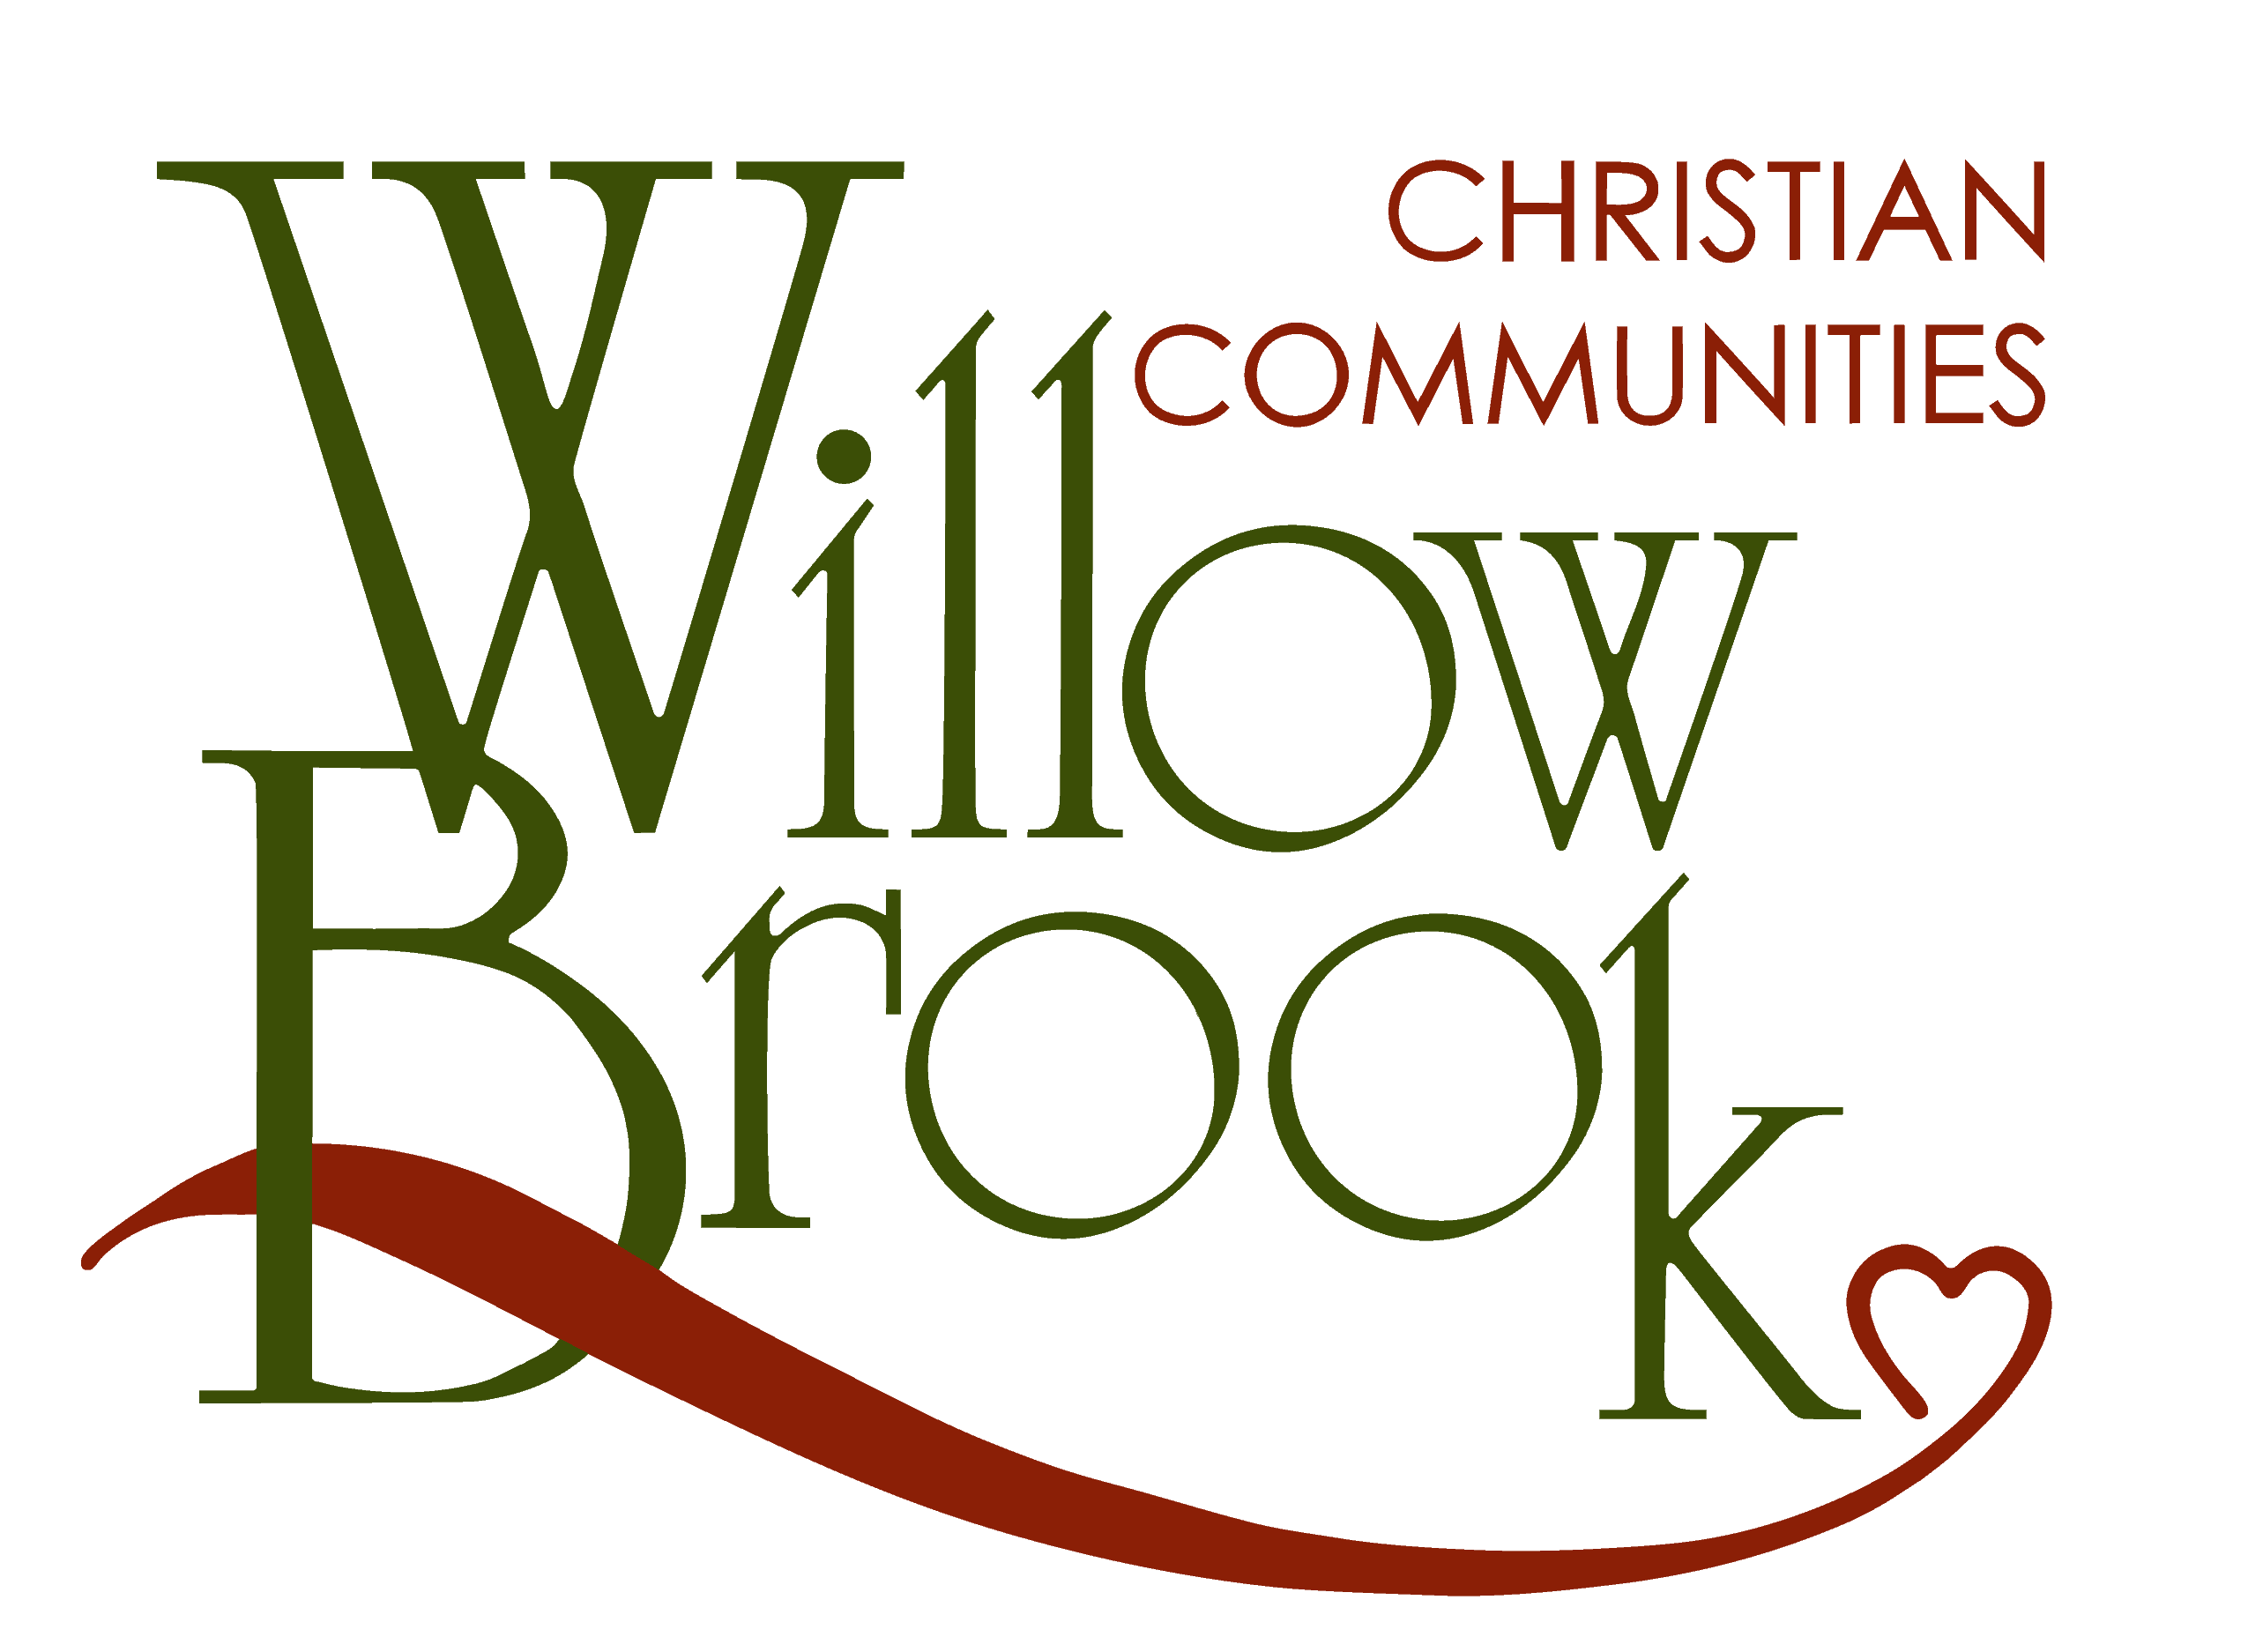 https://willow-brook.org/wp-content/uploads/WBCC-logo-website.png